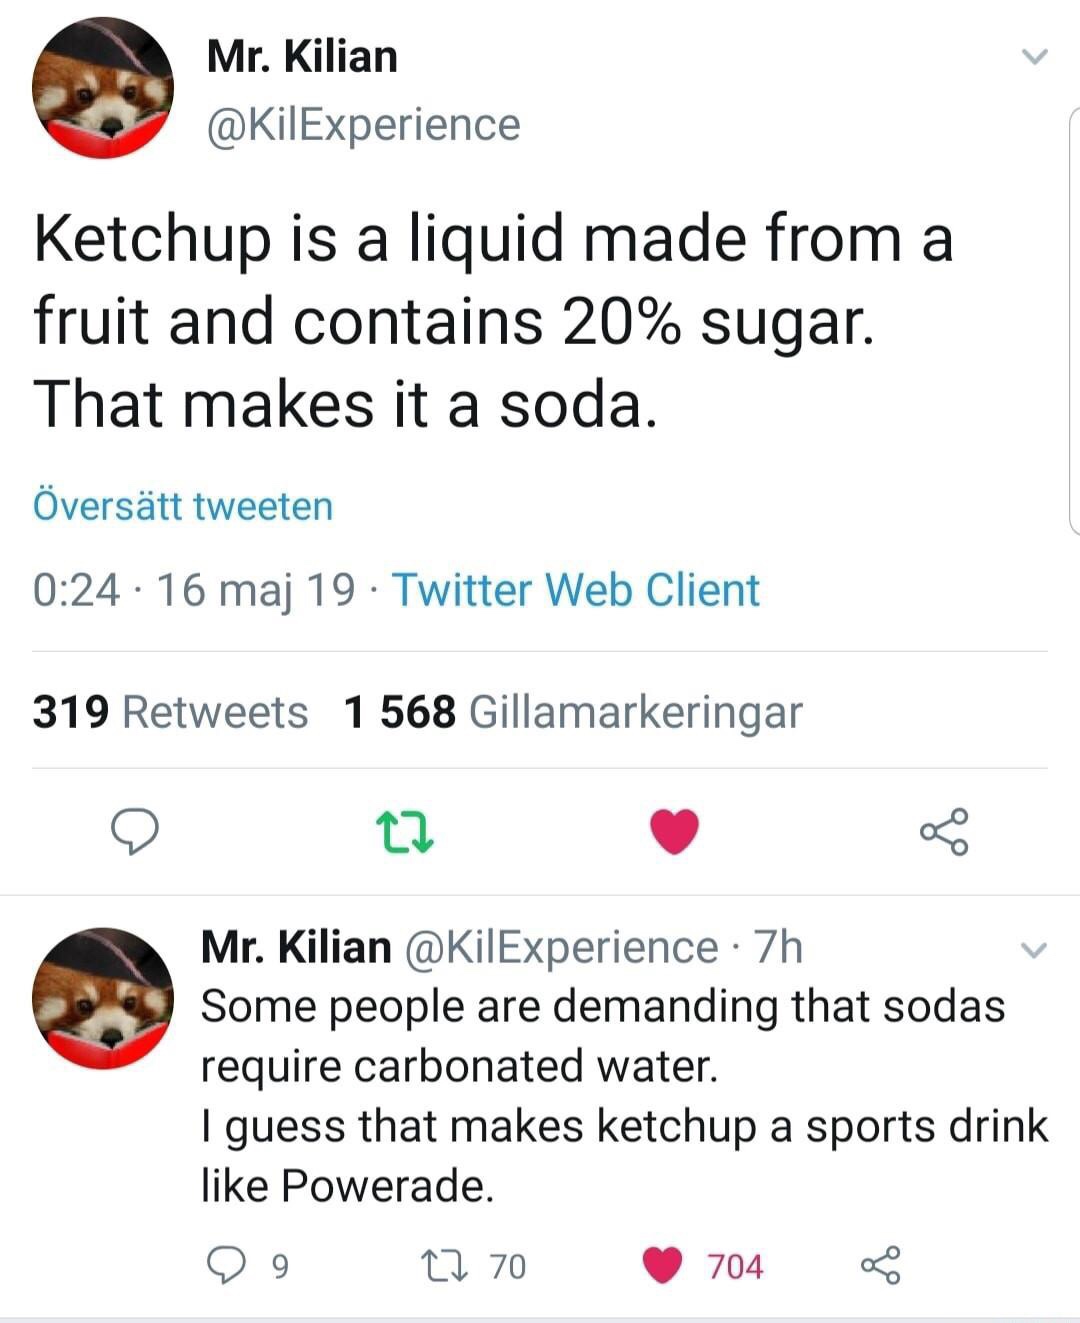 point - Mr. Kilian Ketchup is a liquid made from a fruit and contains 20% sugar. That makes it a soda. verstt tweeten . 16 maj 19 Twitter Web Client 319 1568 Gillamarkeringar Mr. Kilian 7h Some people are demanding that sodas require carbonated water. I g